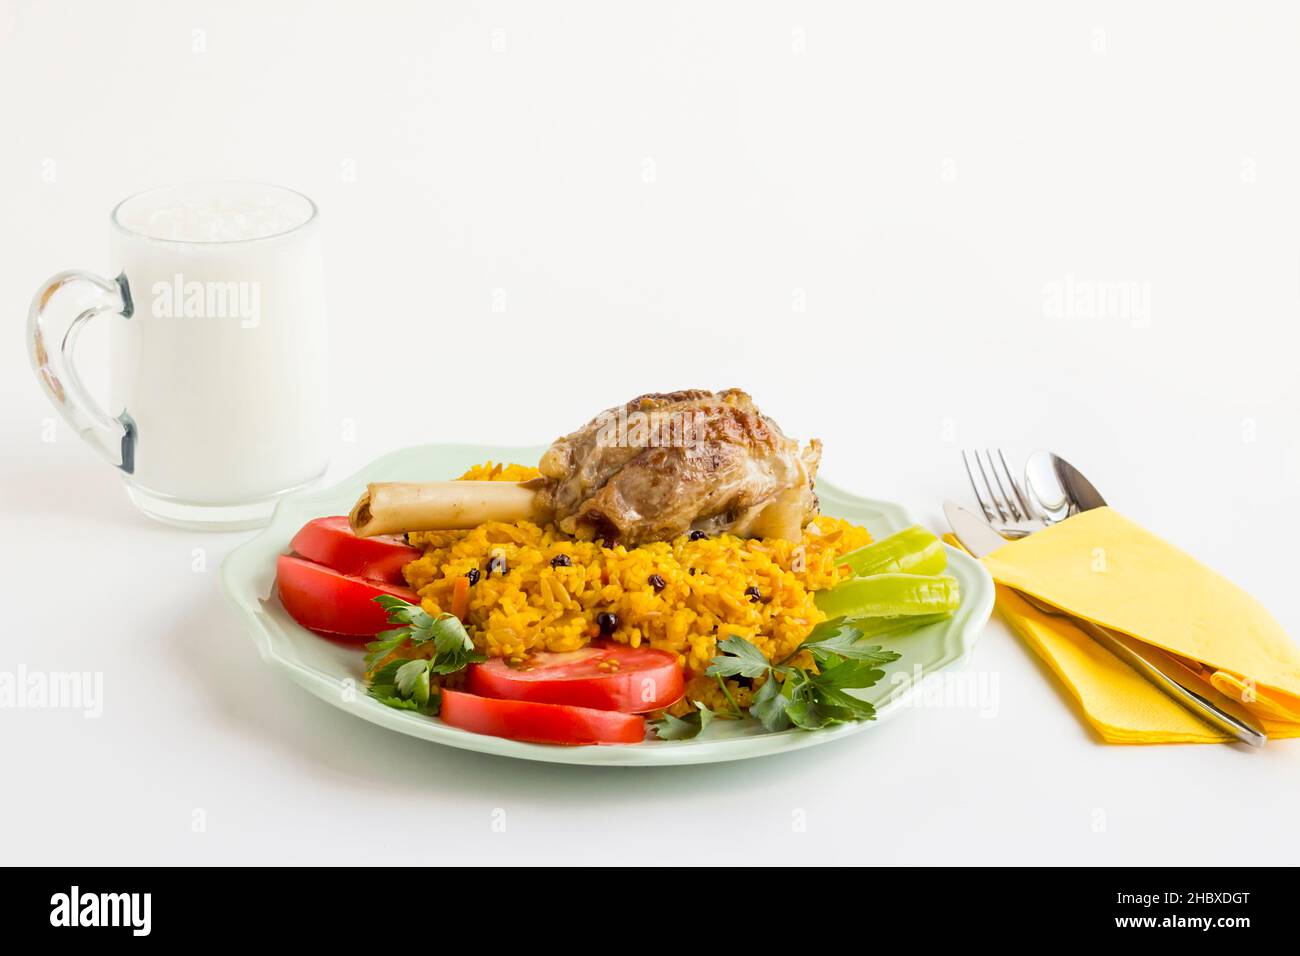 Traditional Saffron Arabian Rice,pilaff with lamb shank in plate,on white surface with cutlery set,napkin and drink.The Sacrifice Feast Concept Stock Photo